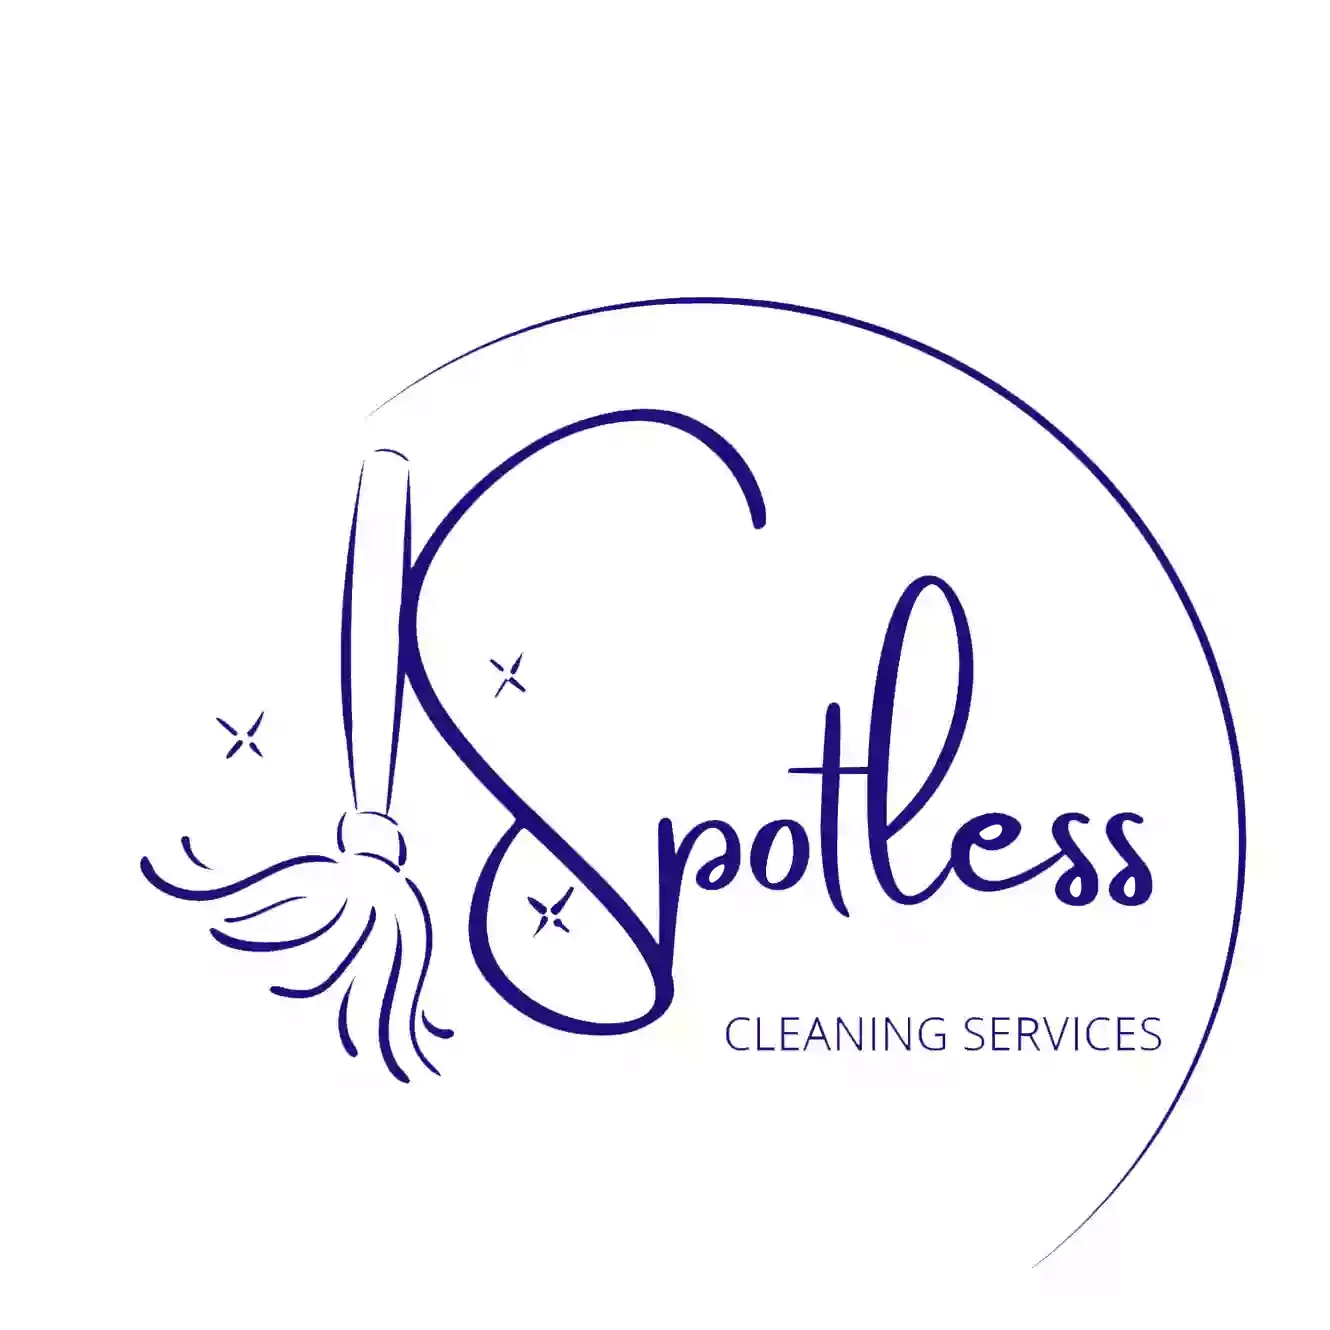 Spotless Cleaning Services LTD